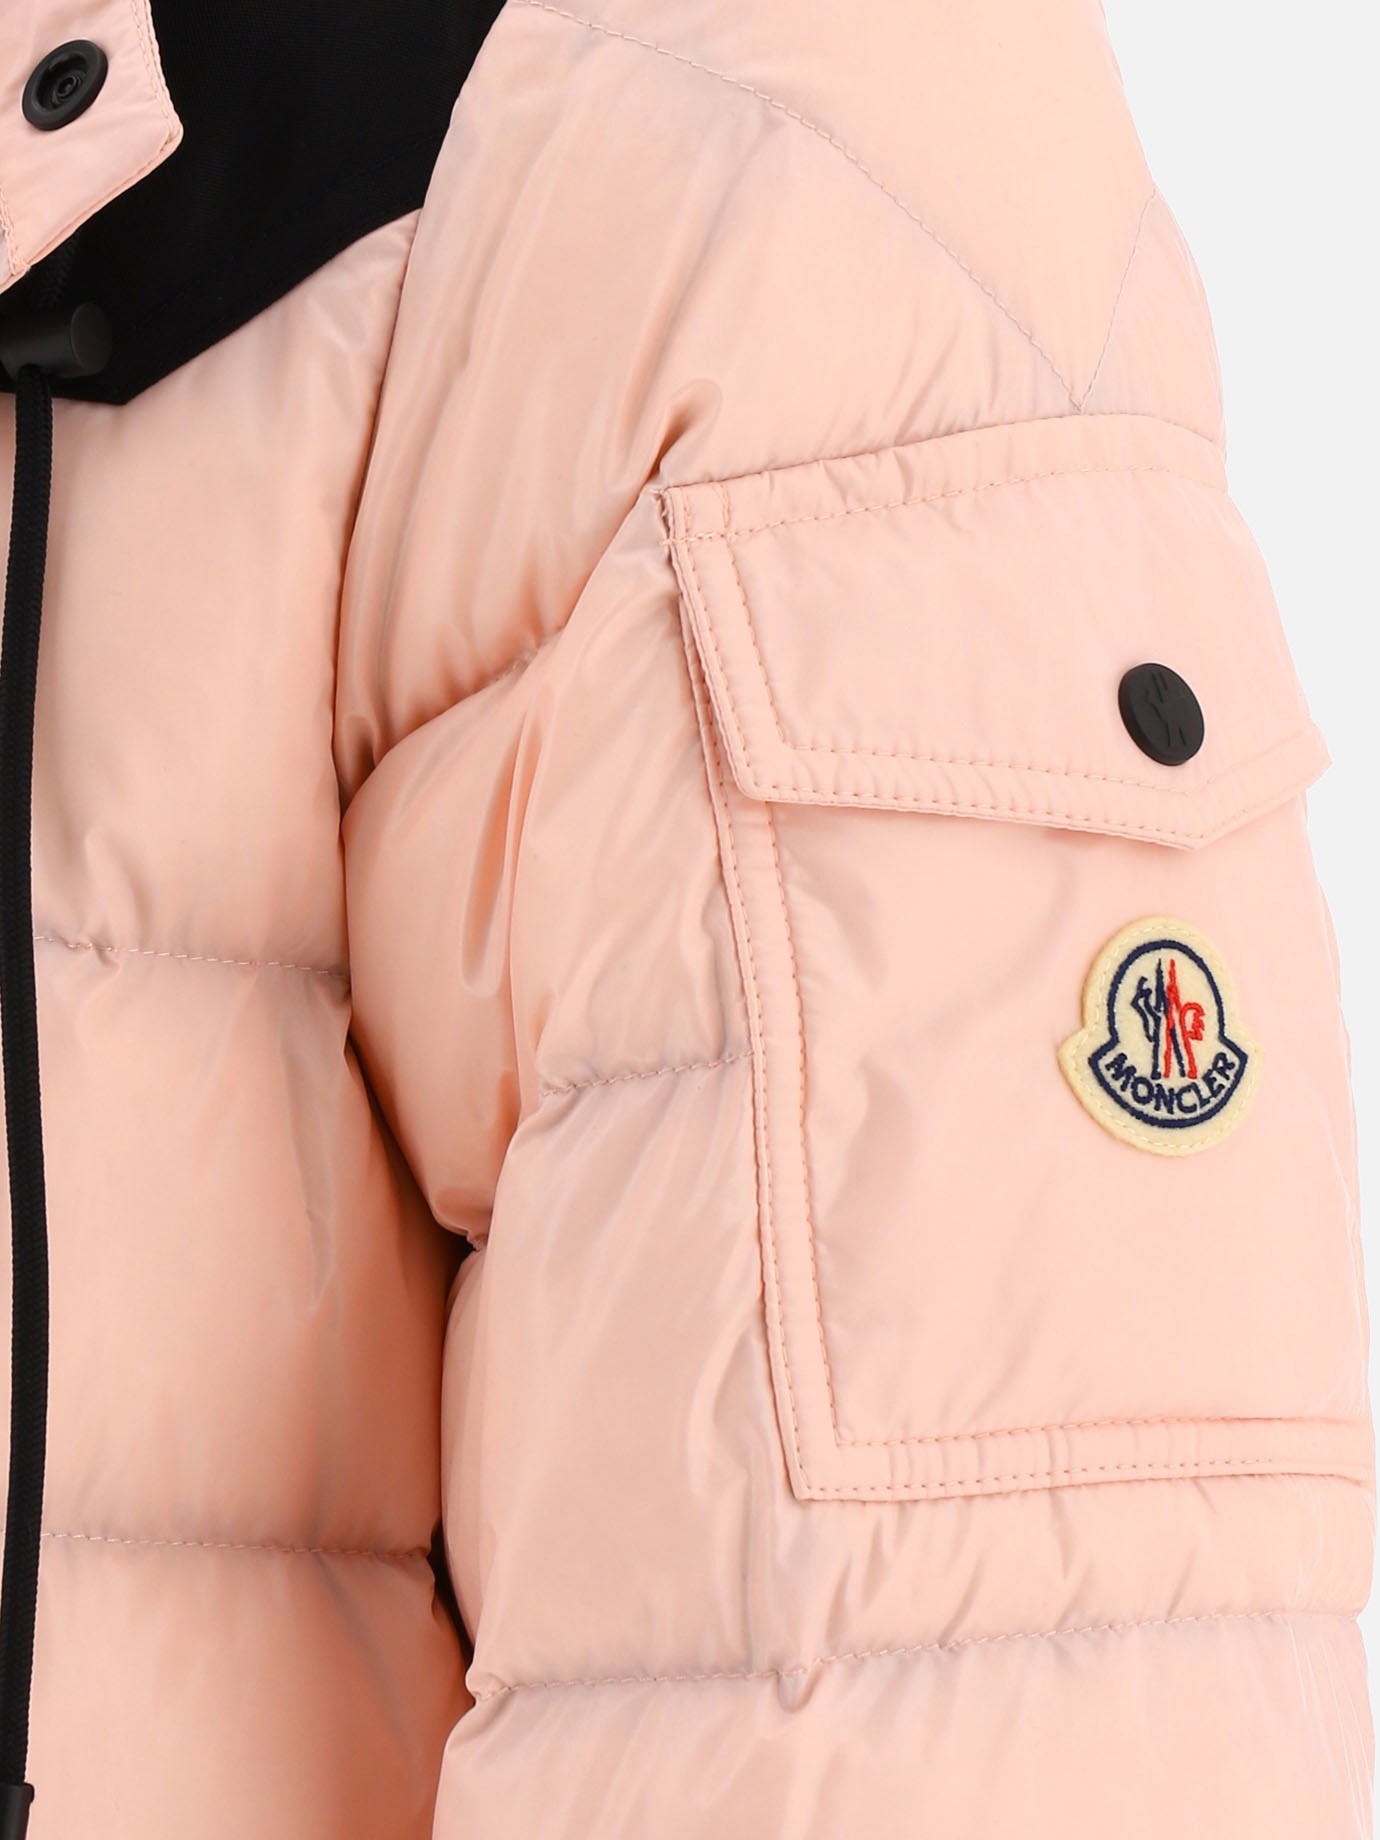  Gombei  down jacket by Moncler